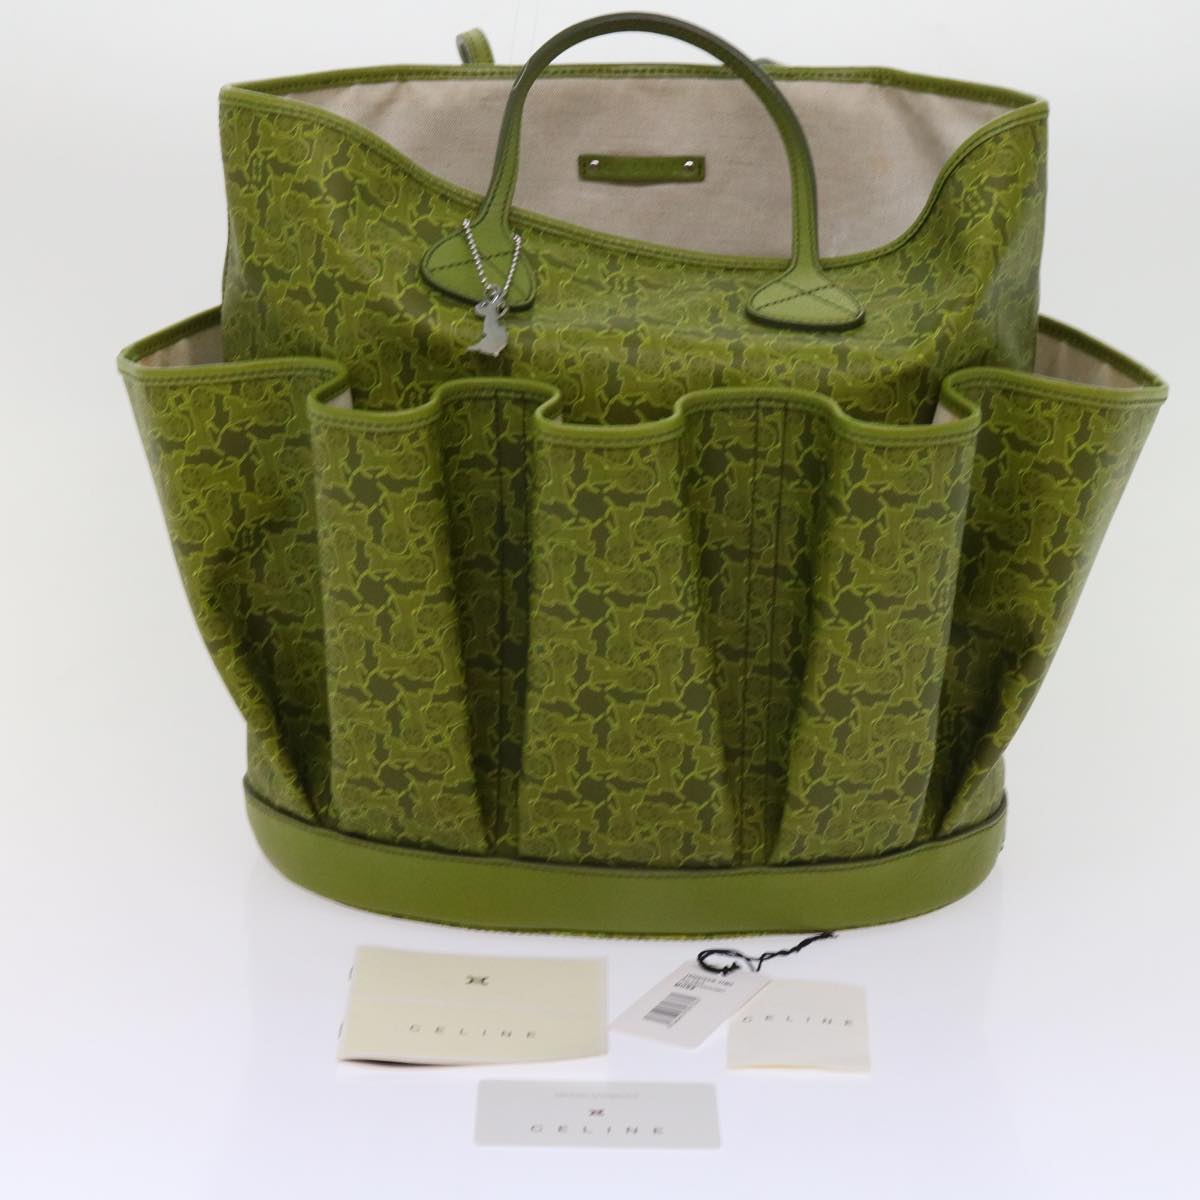 CELINE Horse Carriage Macadam Canvas Tote Bag Green Auth 64256